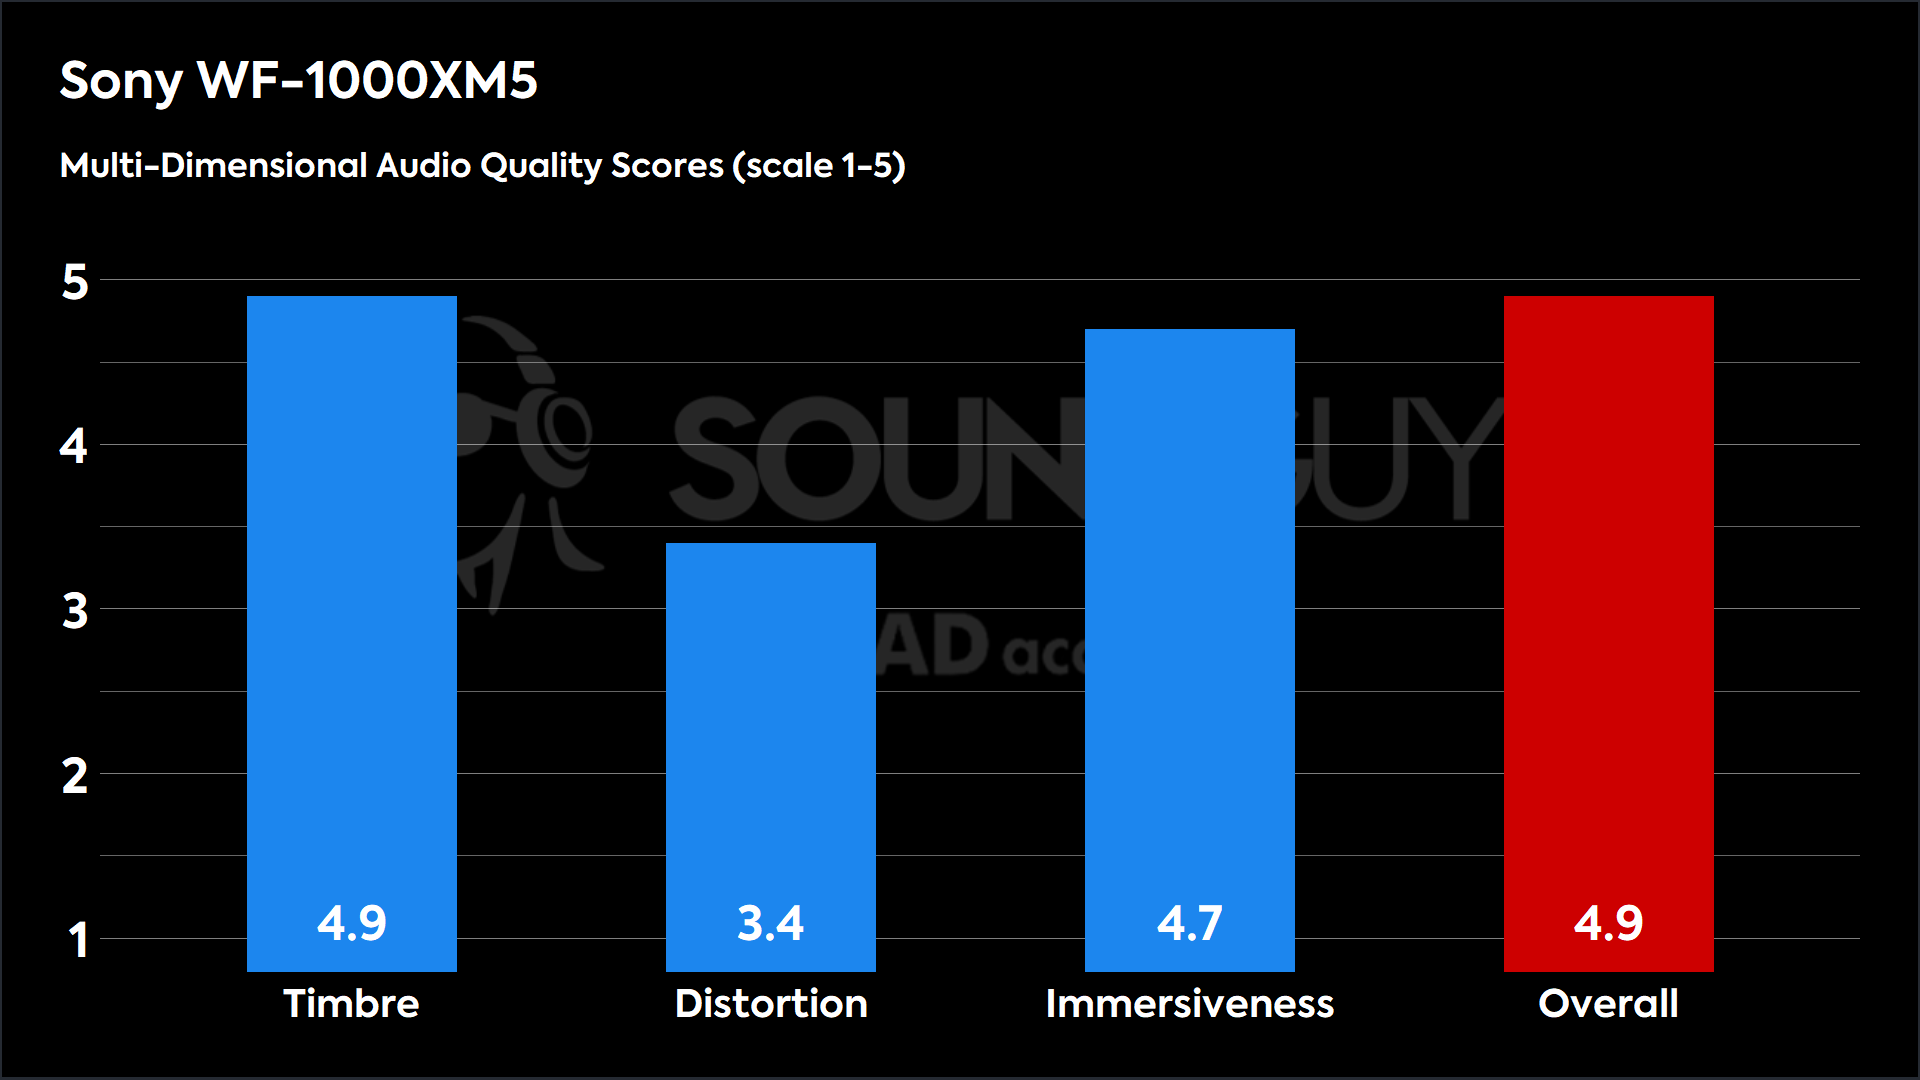 A bar chart showing the Multi-Dimensional Audio Quality Scores earned by the Sony WF-1000XM5.